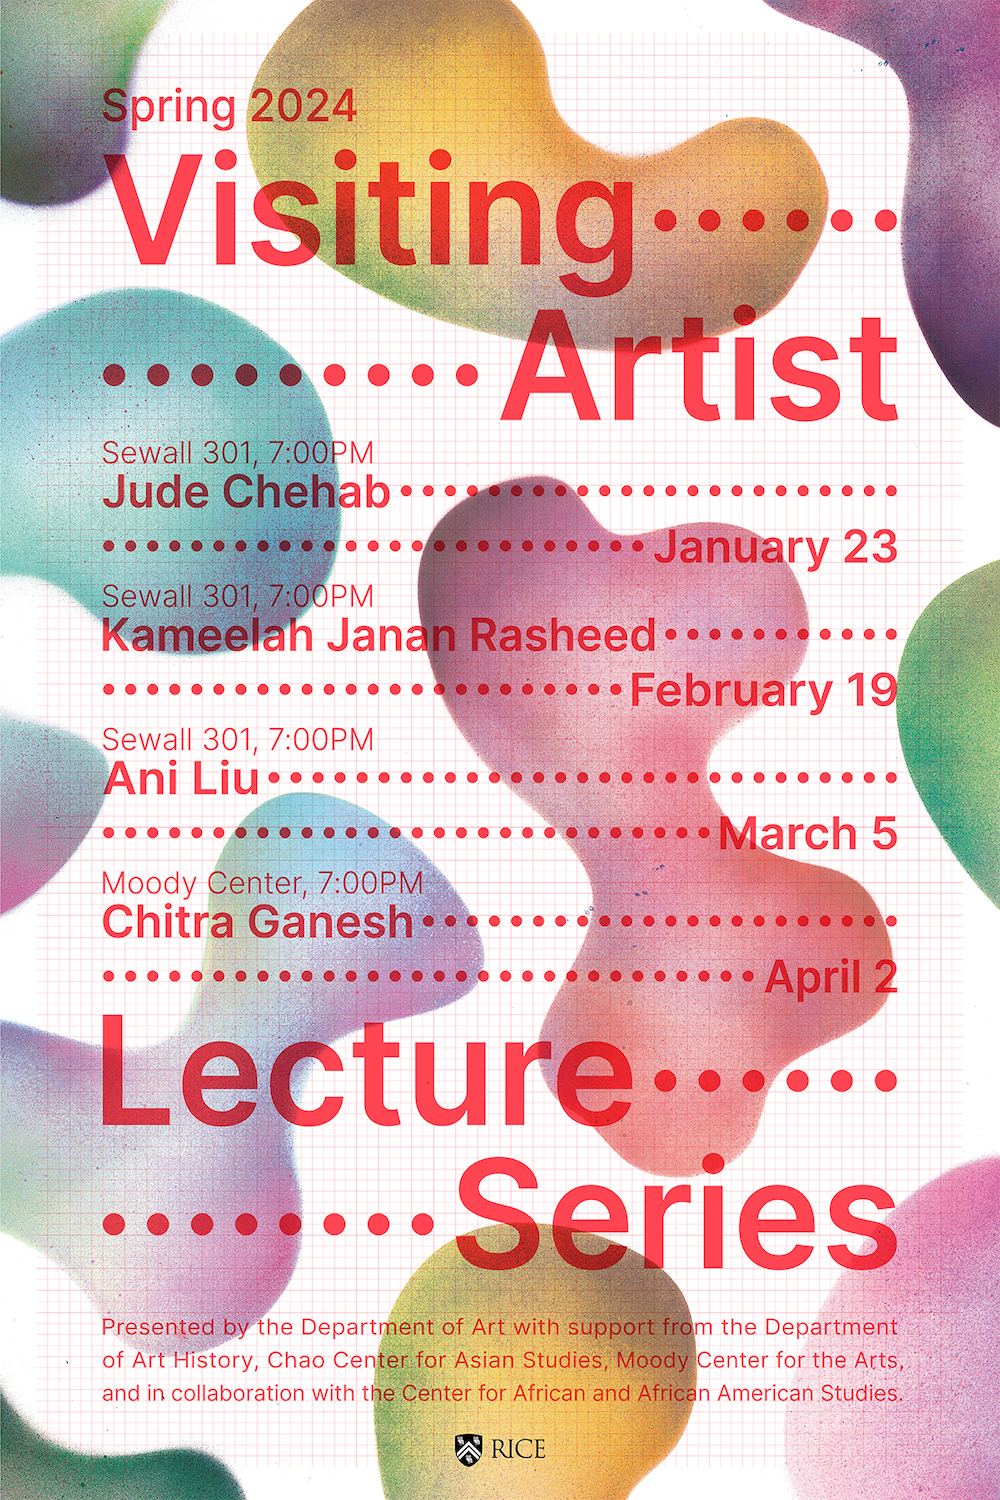 spring 2024 visiting artist lecture series promotional poster; listing artist names